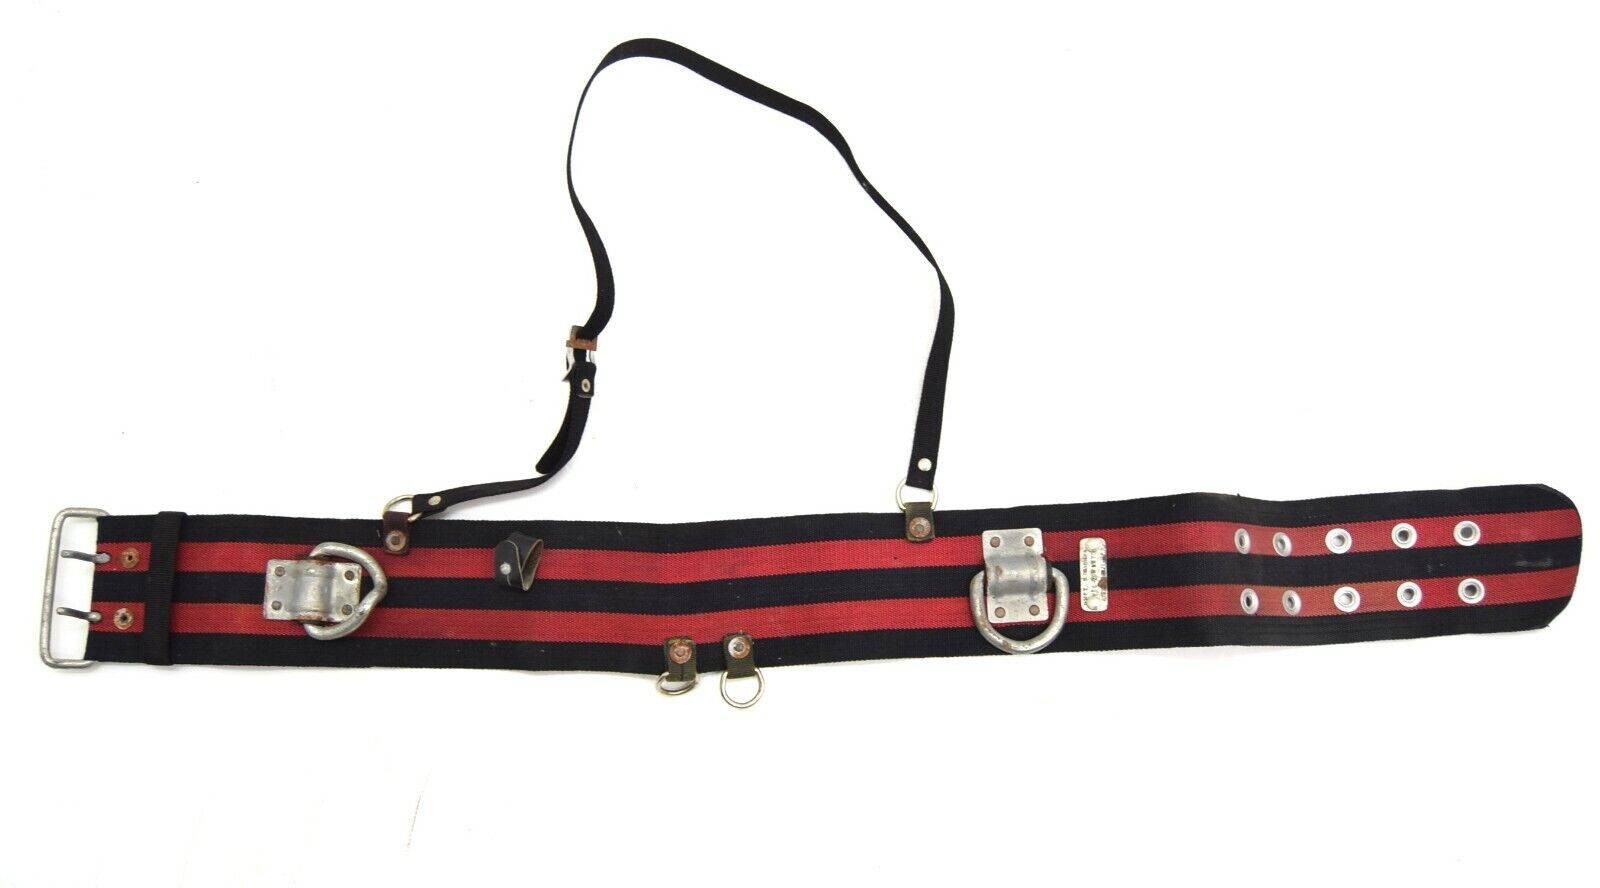 Army / Military Issue Climbing Belt Heavy Duty With Metal Loops Harness Strap